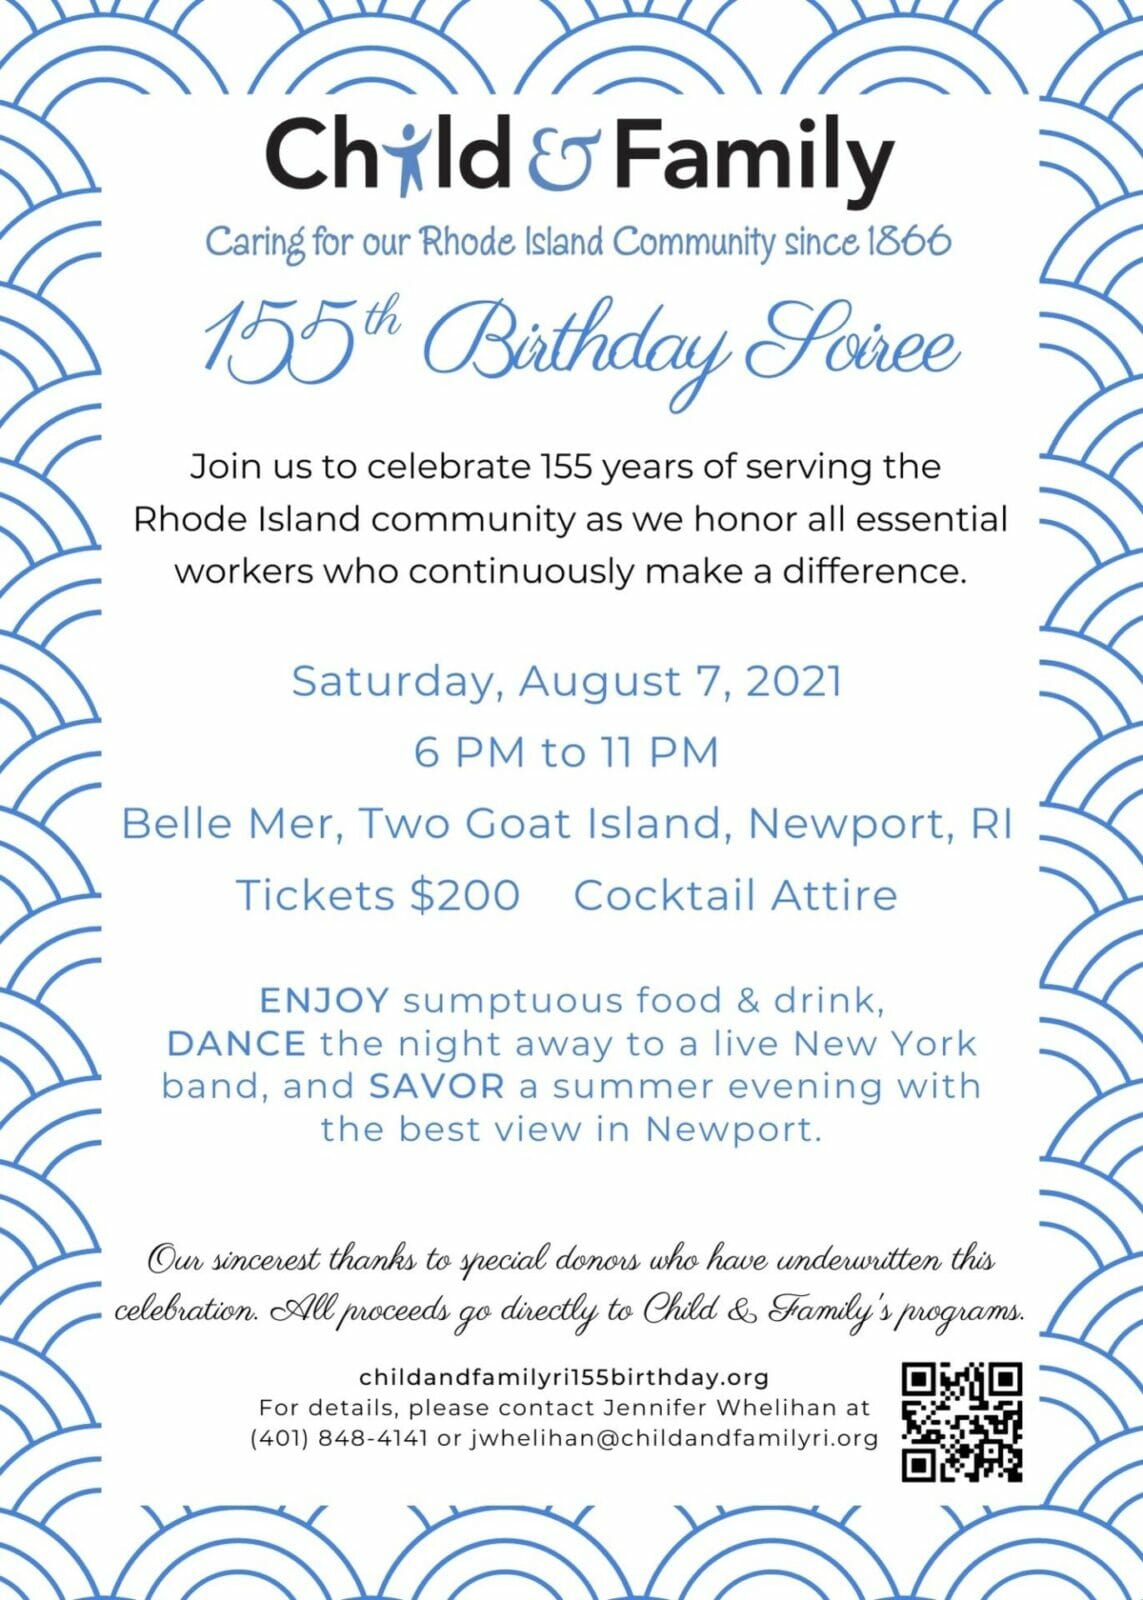 Child & Family’s 155th Birthday Soiree Newport Living and Lifestyles